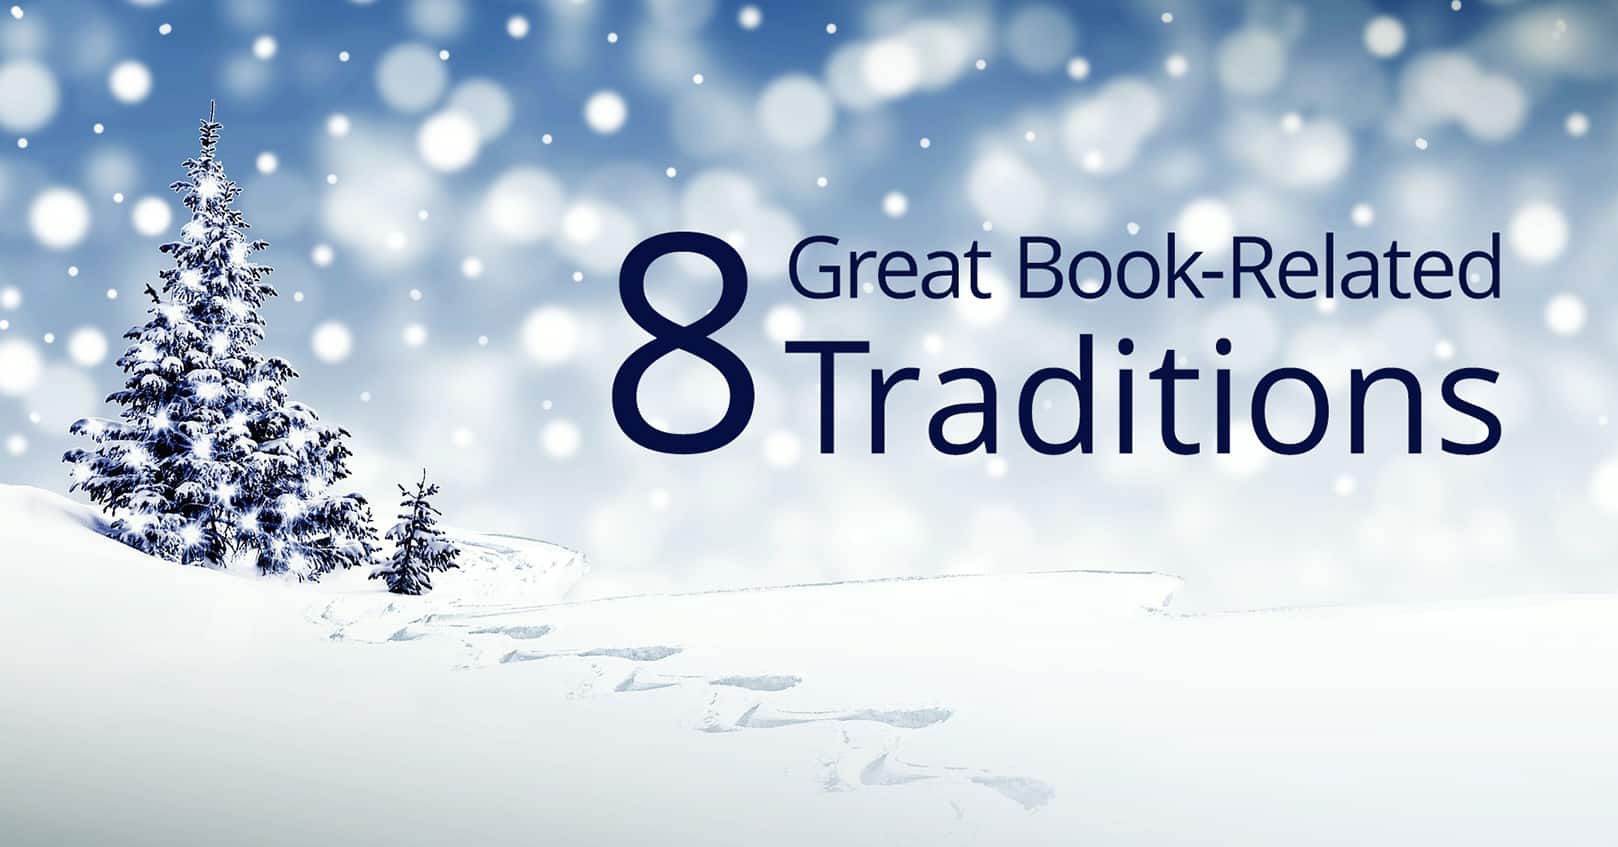 great book-related traditions